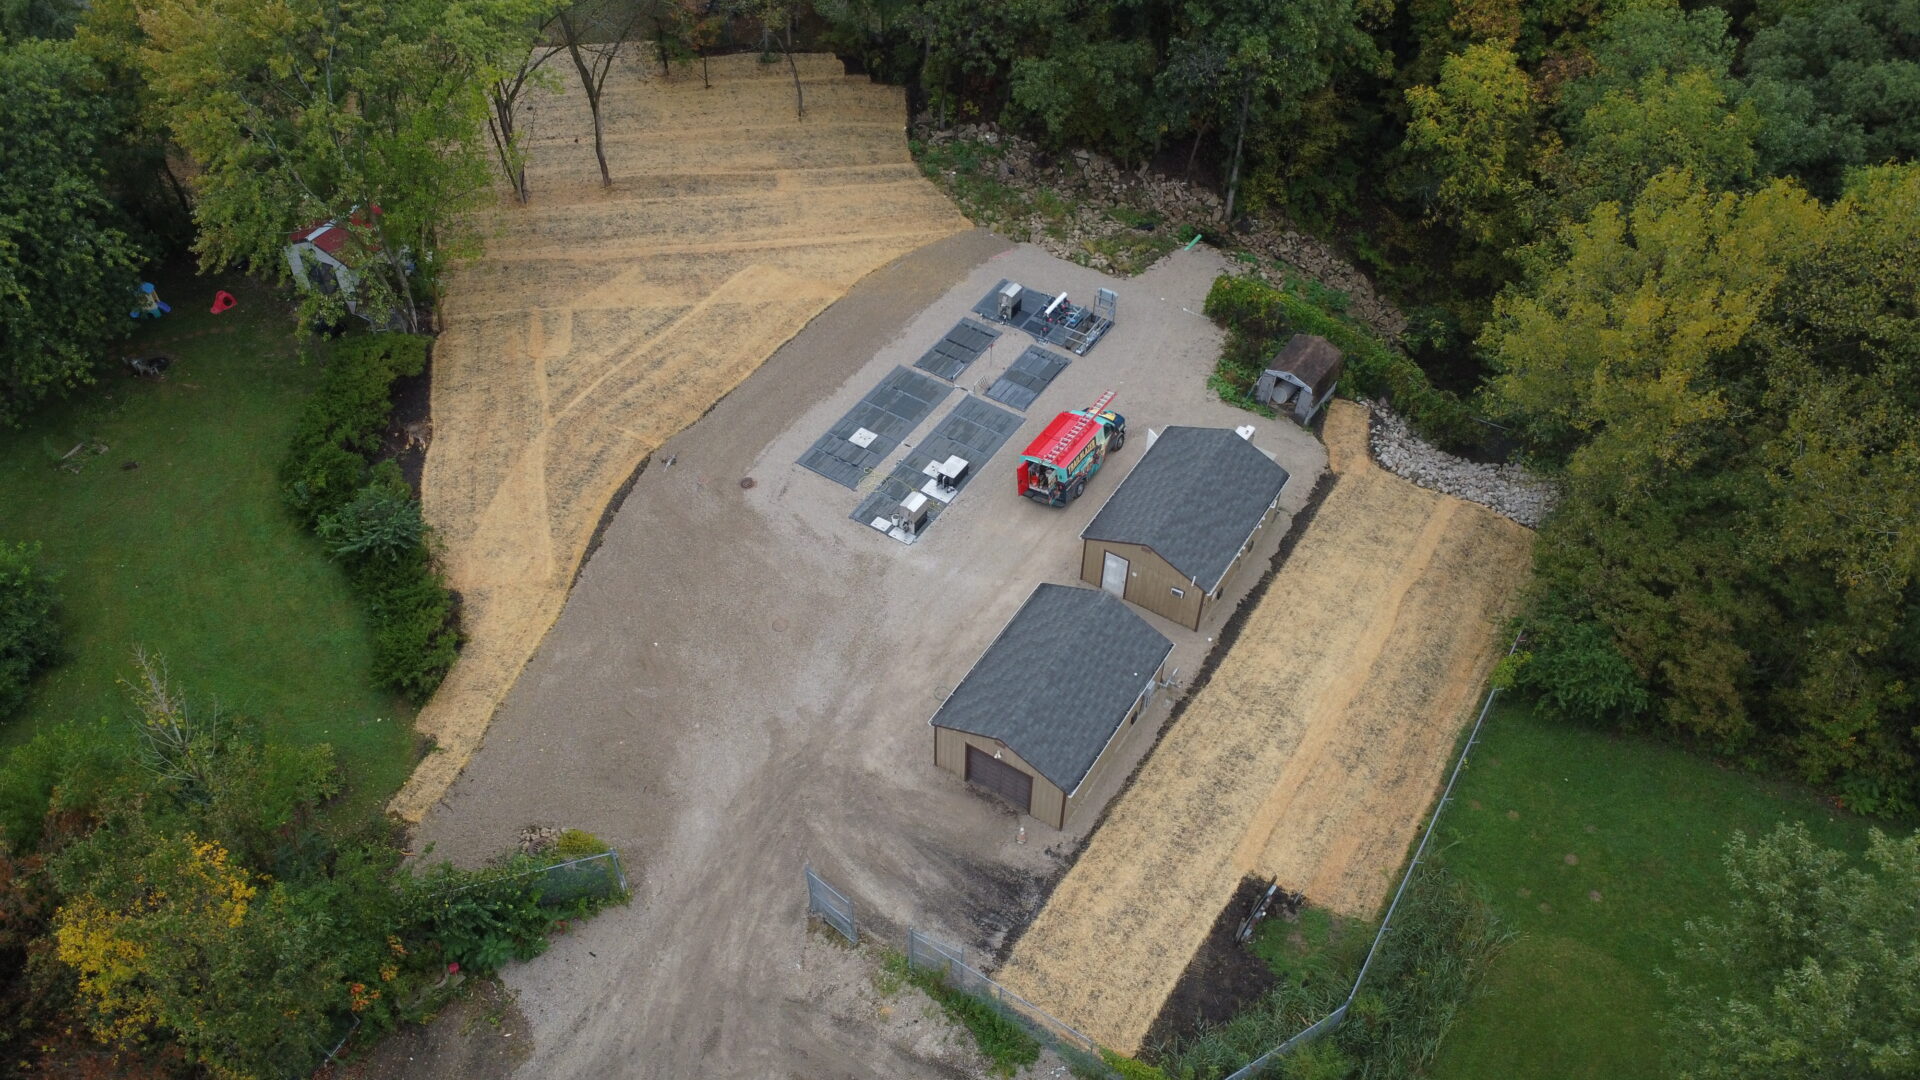 Aerial view of rural backyard with buildings and truck.